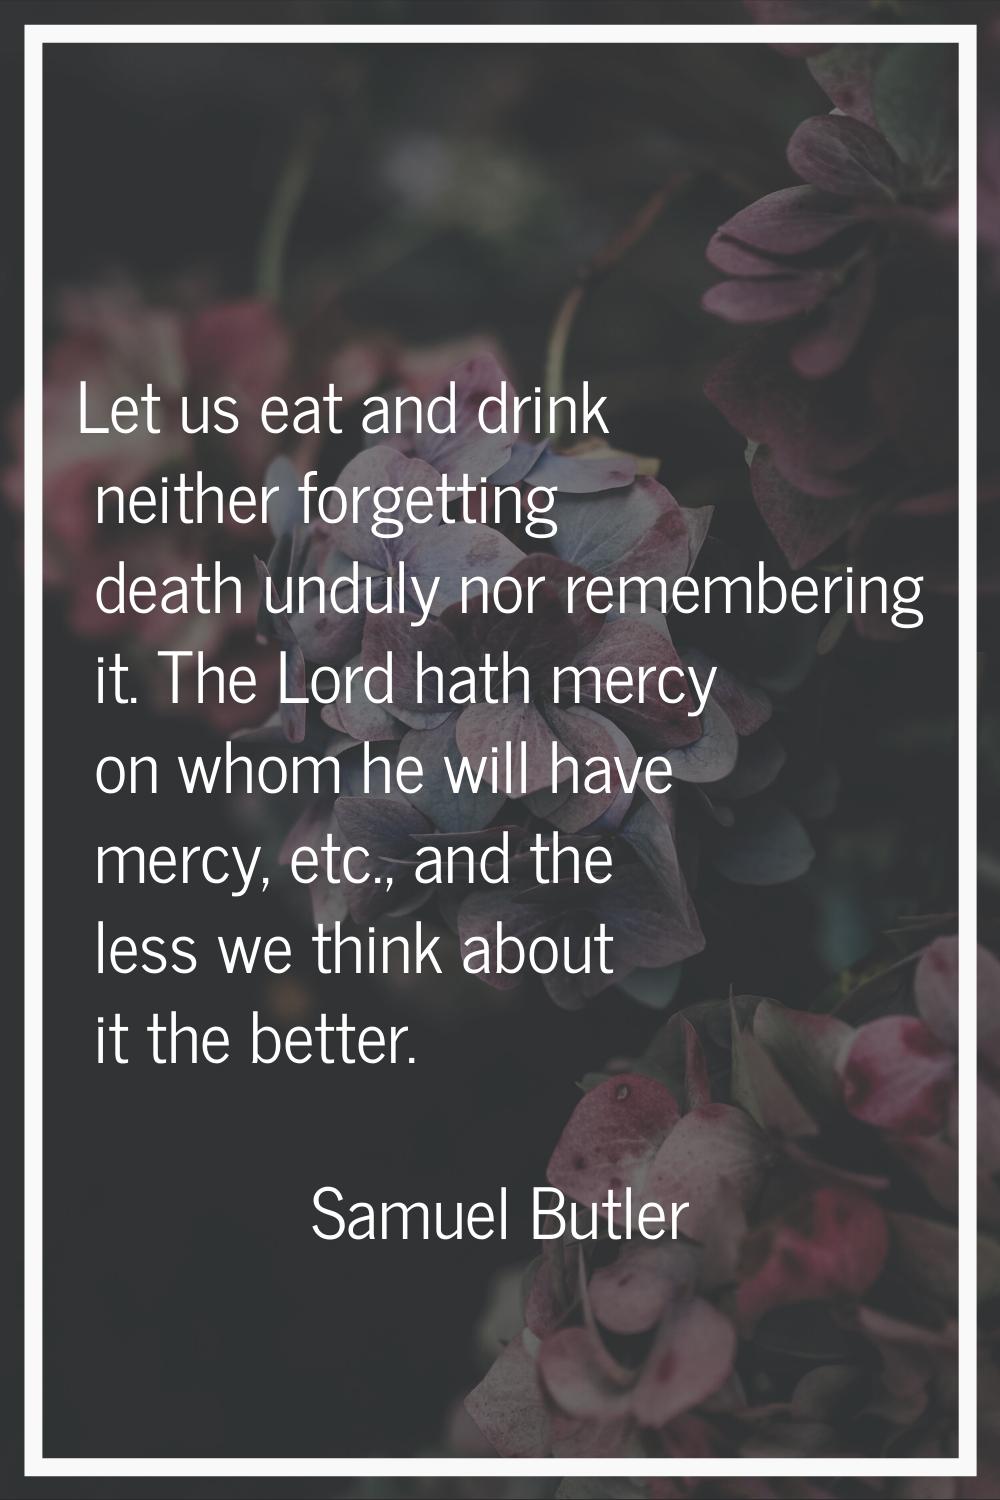 Let us eat and drink neither forgetting death unduly nor remembering it. The Lord hath mercy on who